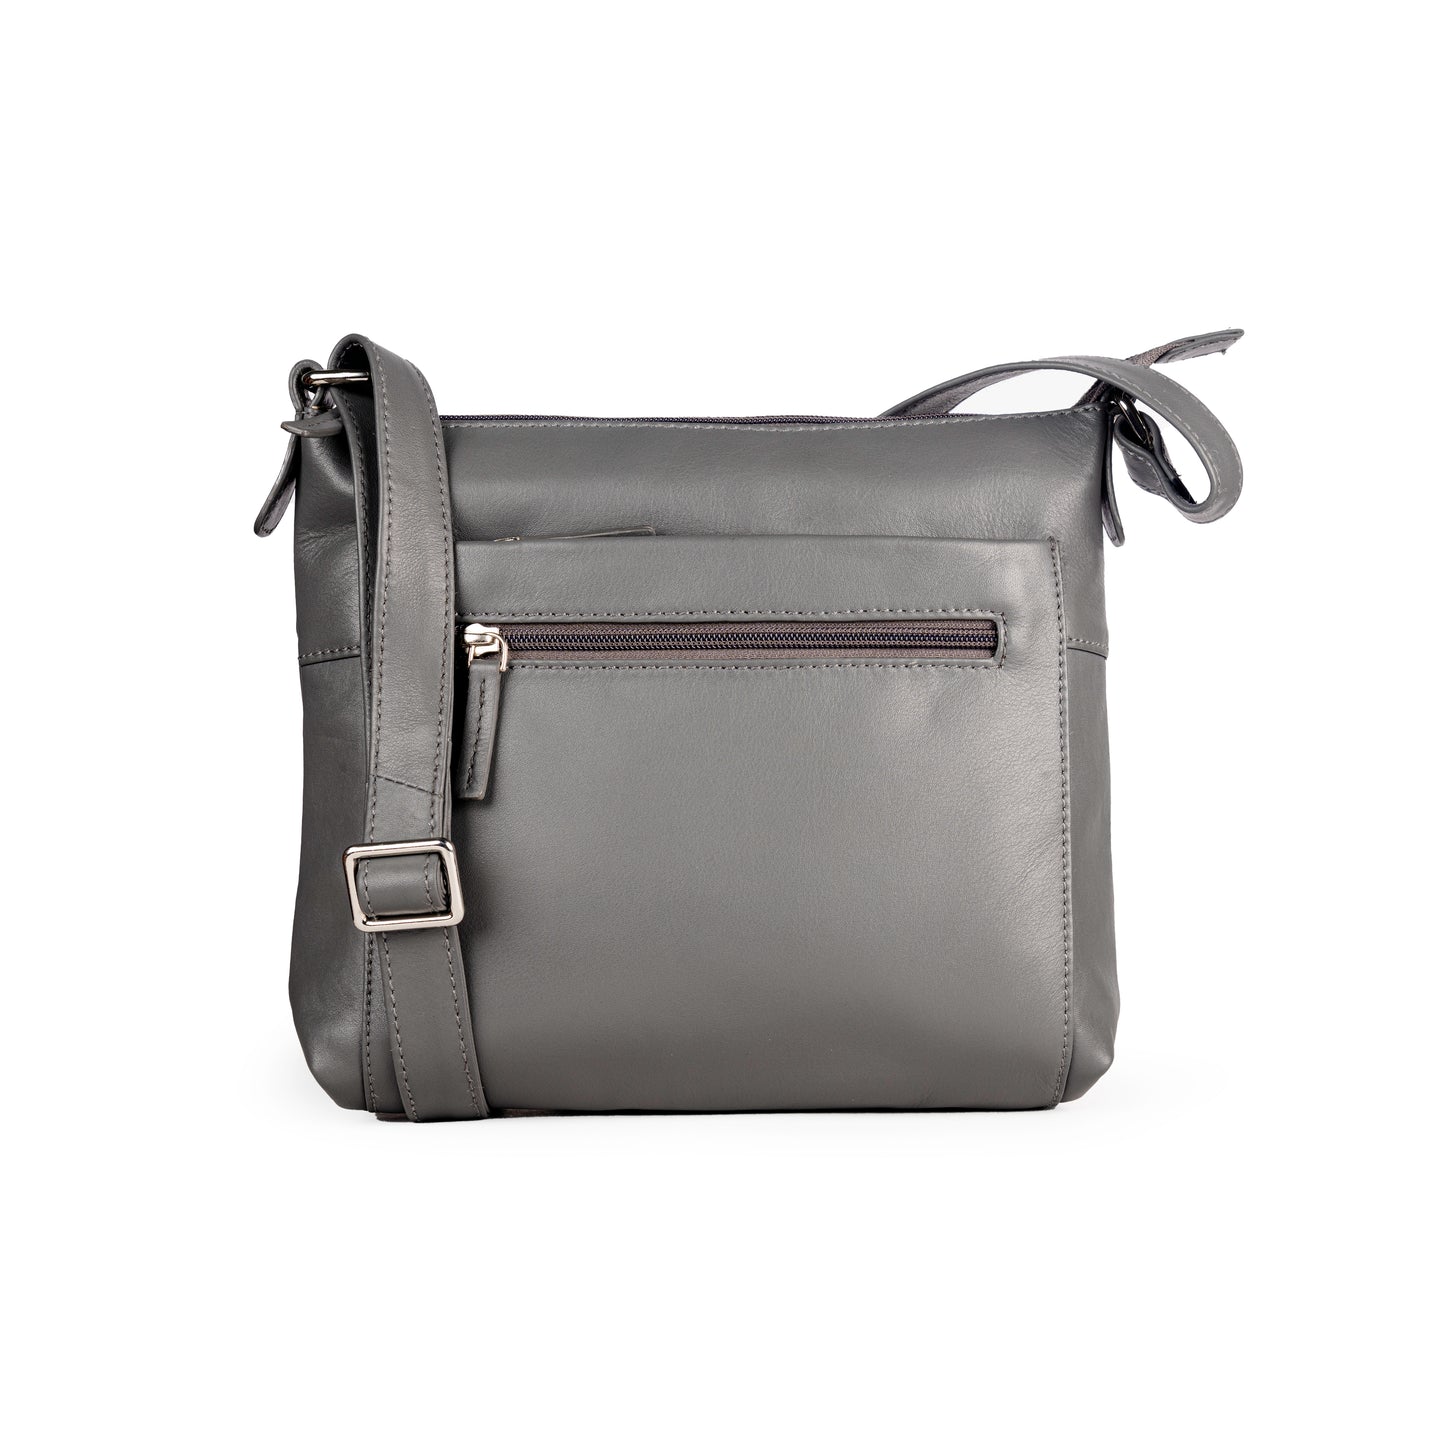 GT-H88: Classic Leather Crossbody Bag, Over the Body Bag with Long Adjustable Strap by Grains & Tan